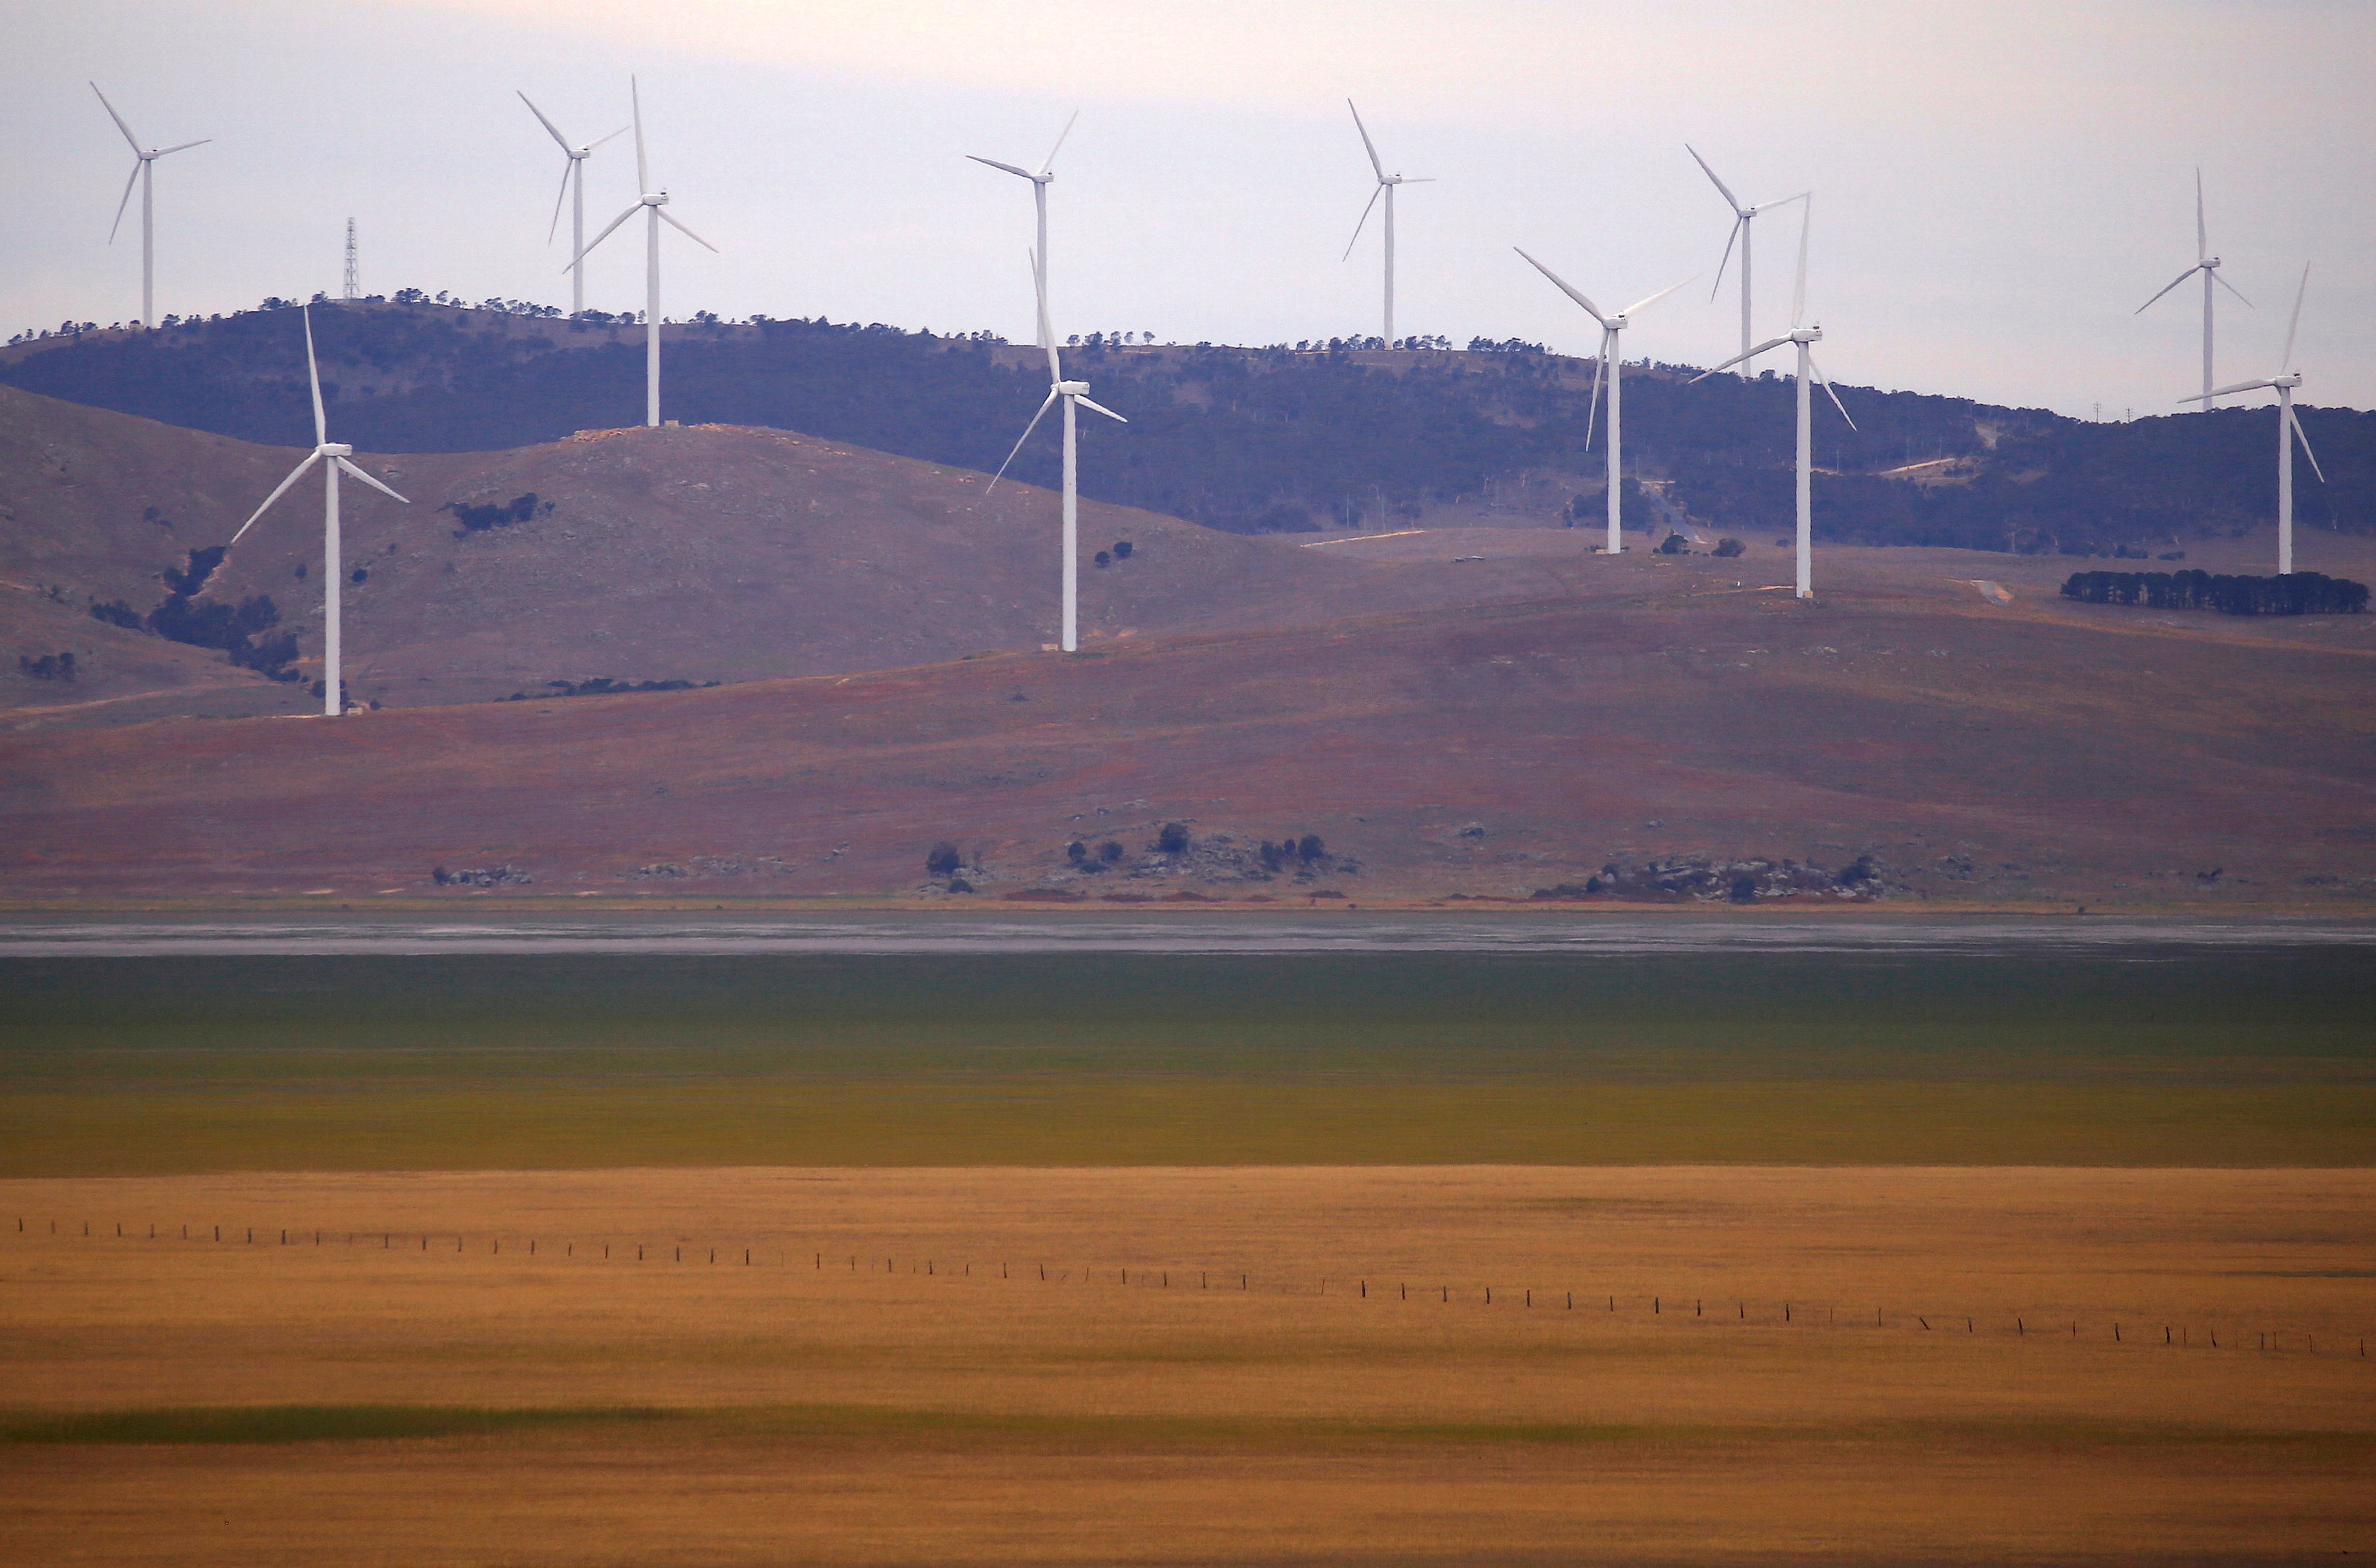 A fence is seen in front of wind turbines that are part of the Infigen Energy Capital Wind Farm located on the hills surrounding Lake George, near the Australian capital city of Canberra